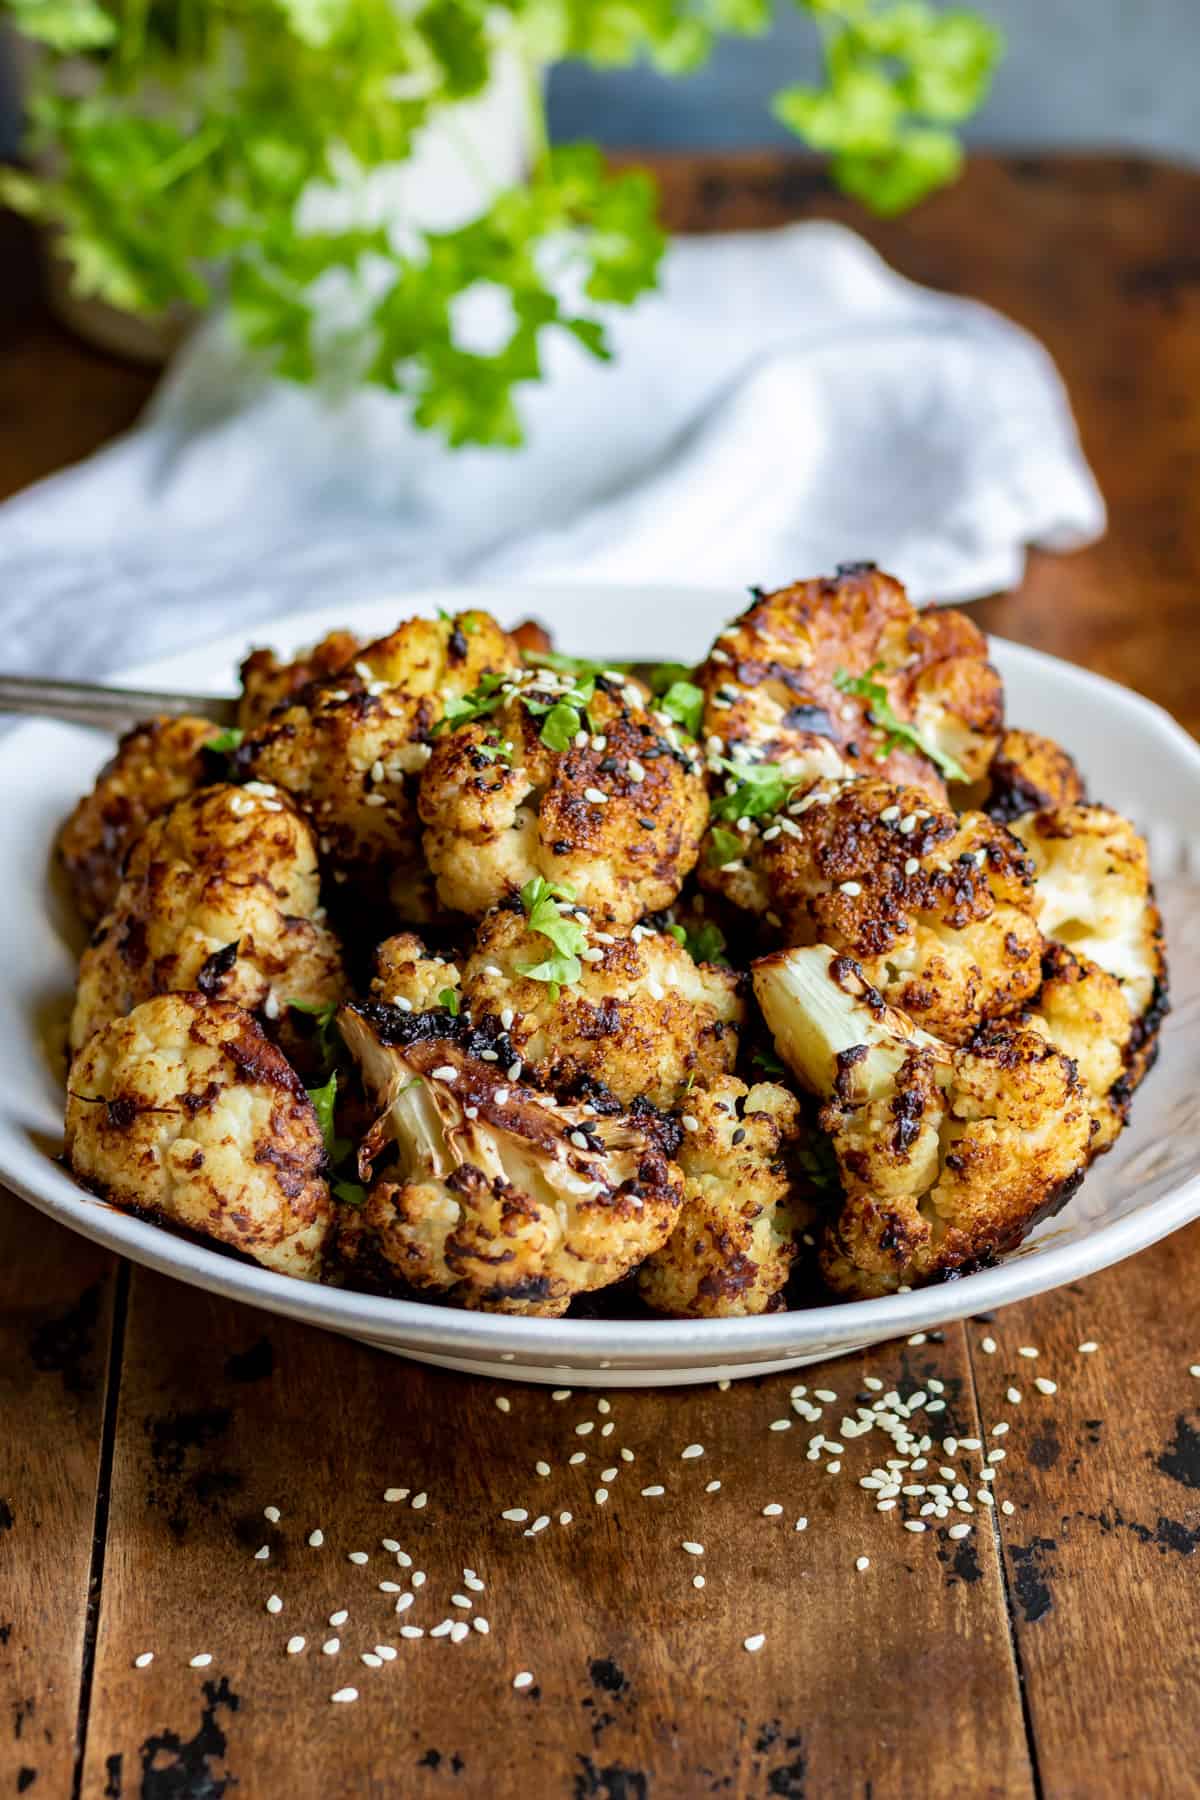 A table with a serving dish of miso cauliflower.